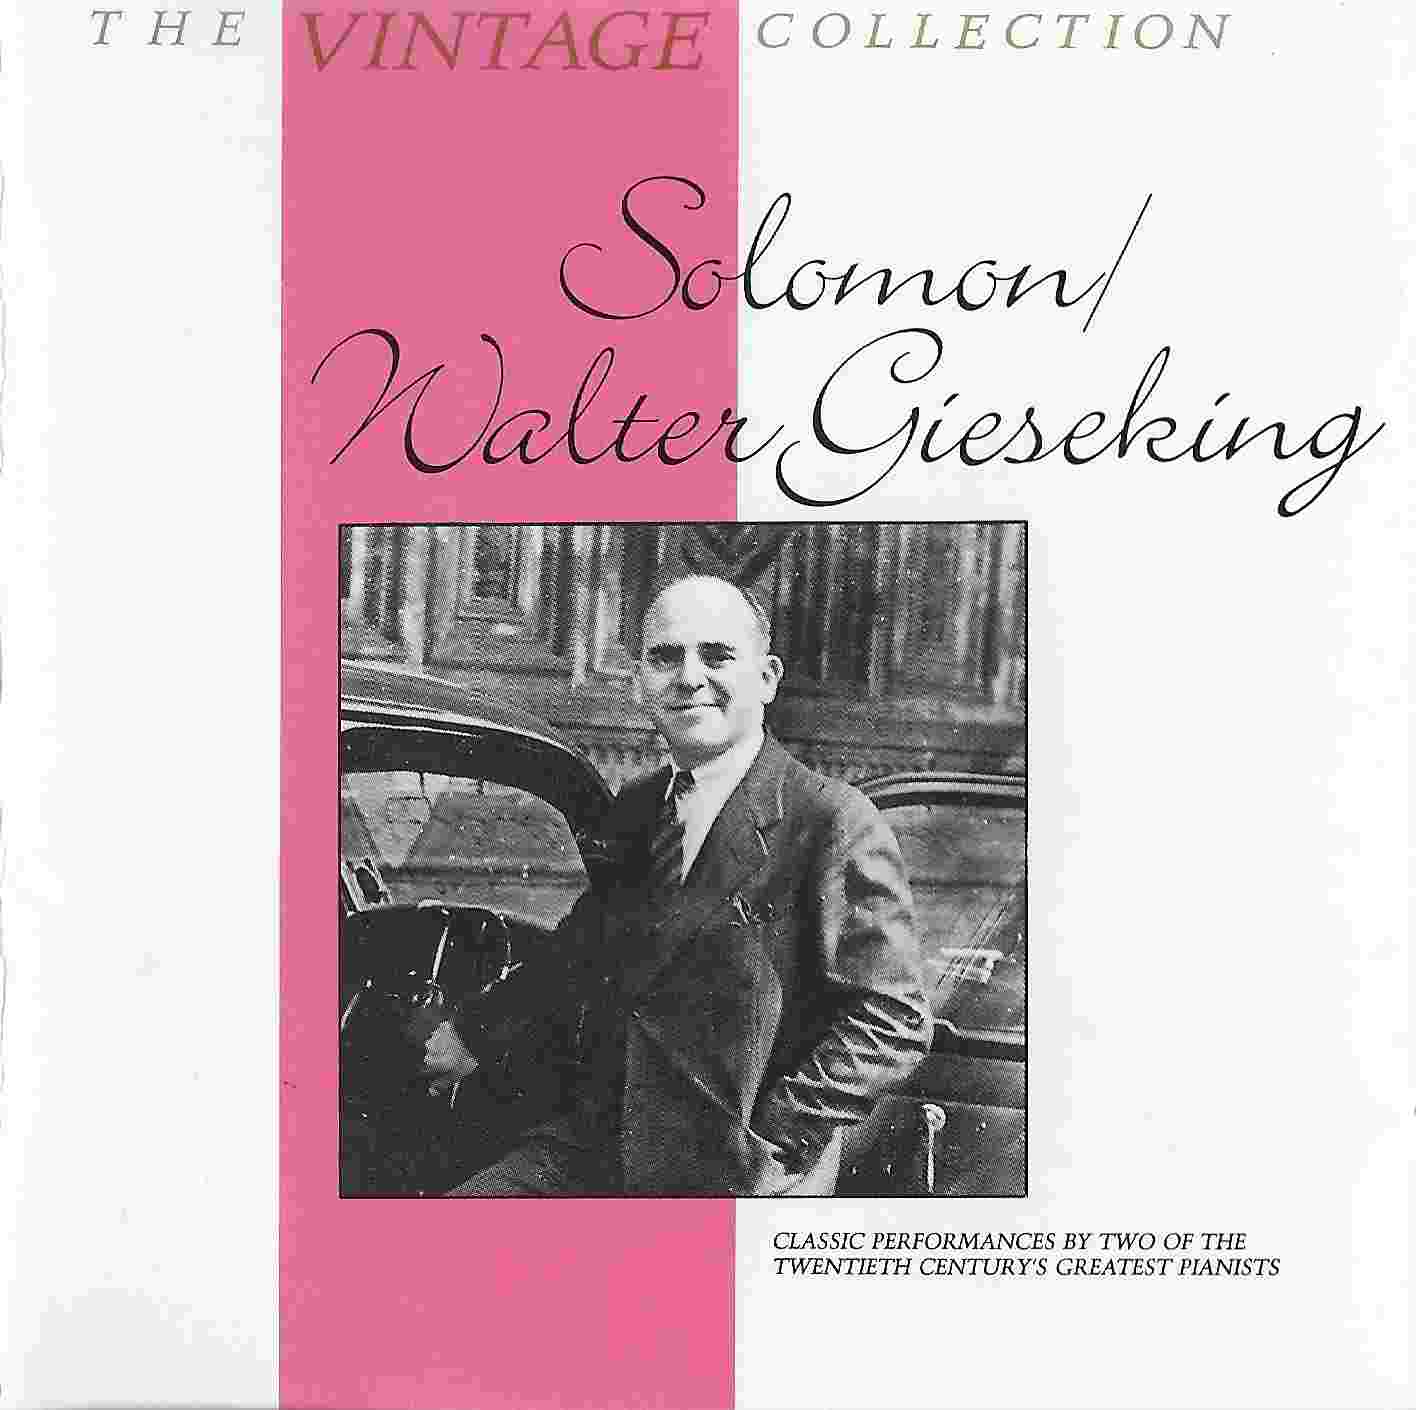 Picture of BBCCD718 The vintage collection - Solomon / Gieseking by artist Solomon / Gieseking from the BBC cds - Records and Tapes library